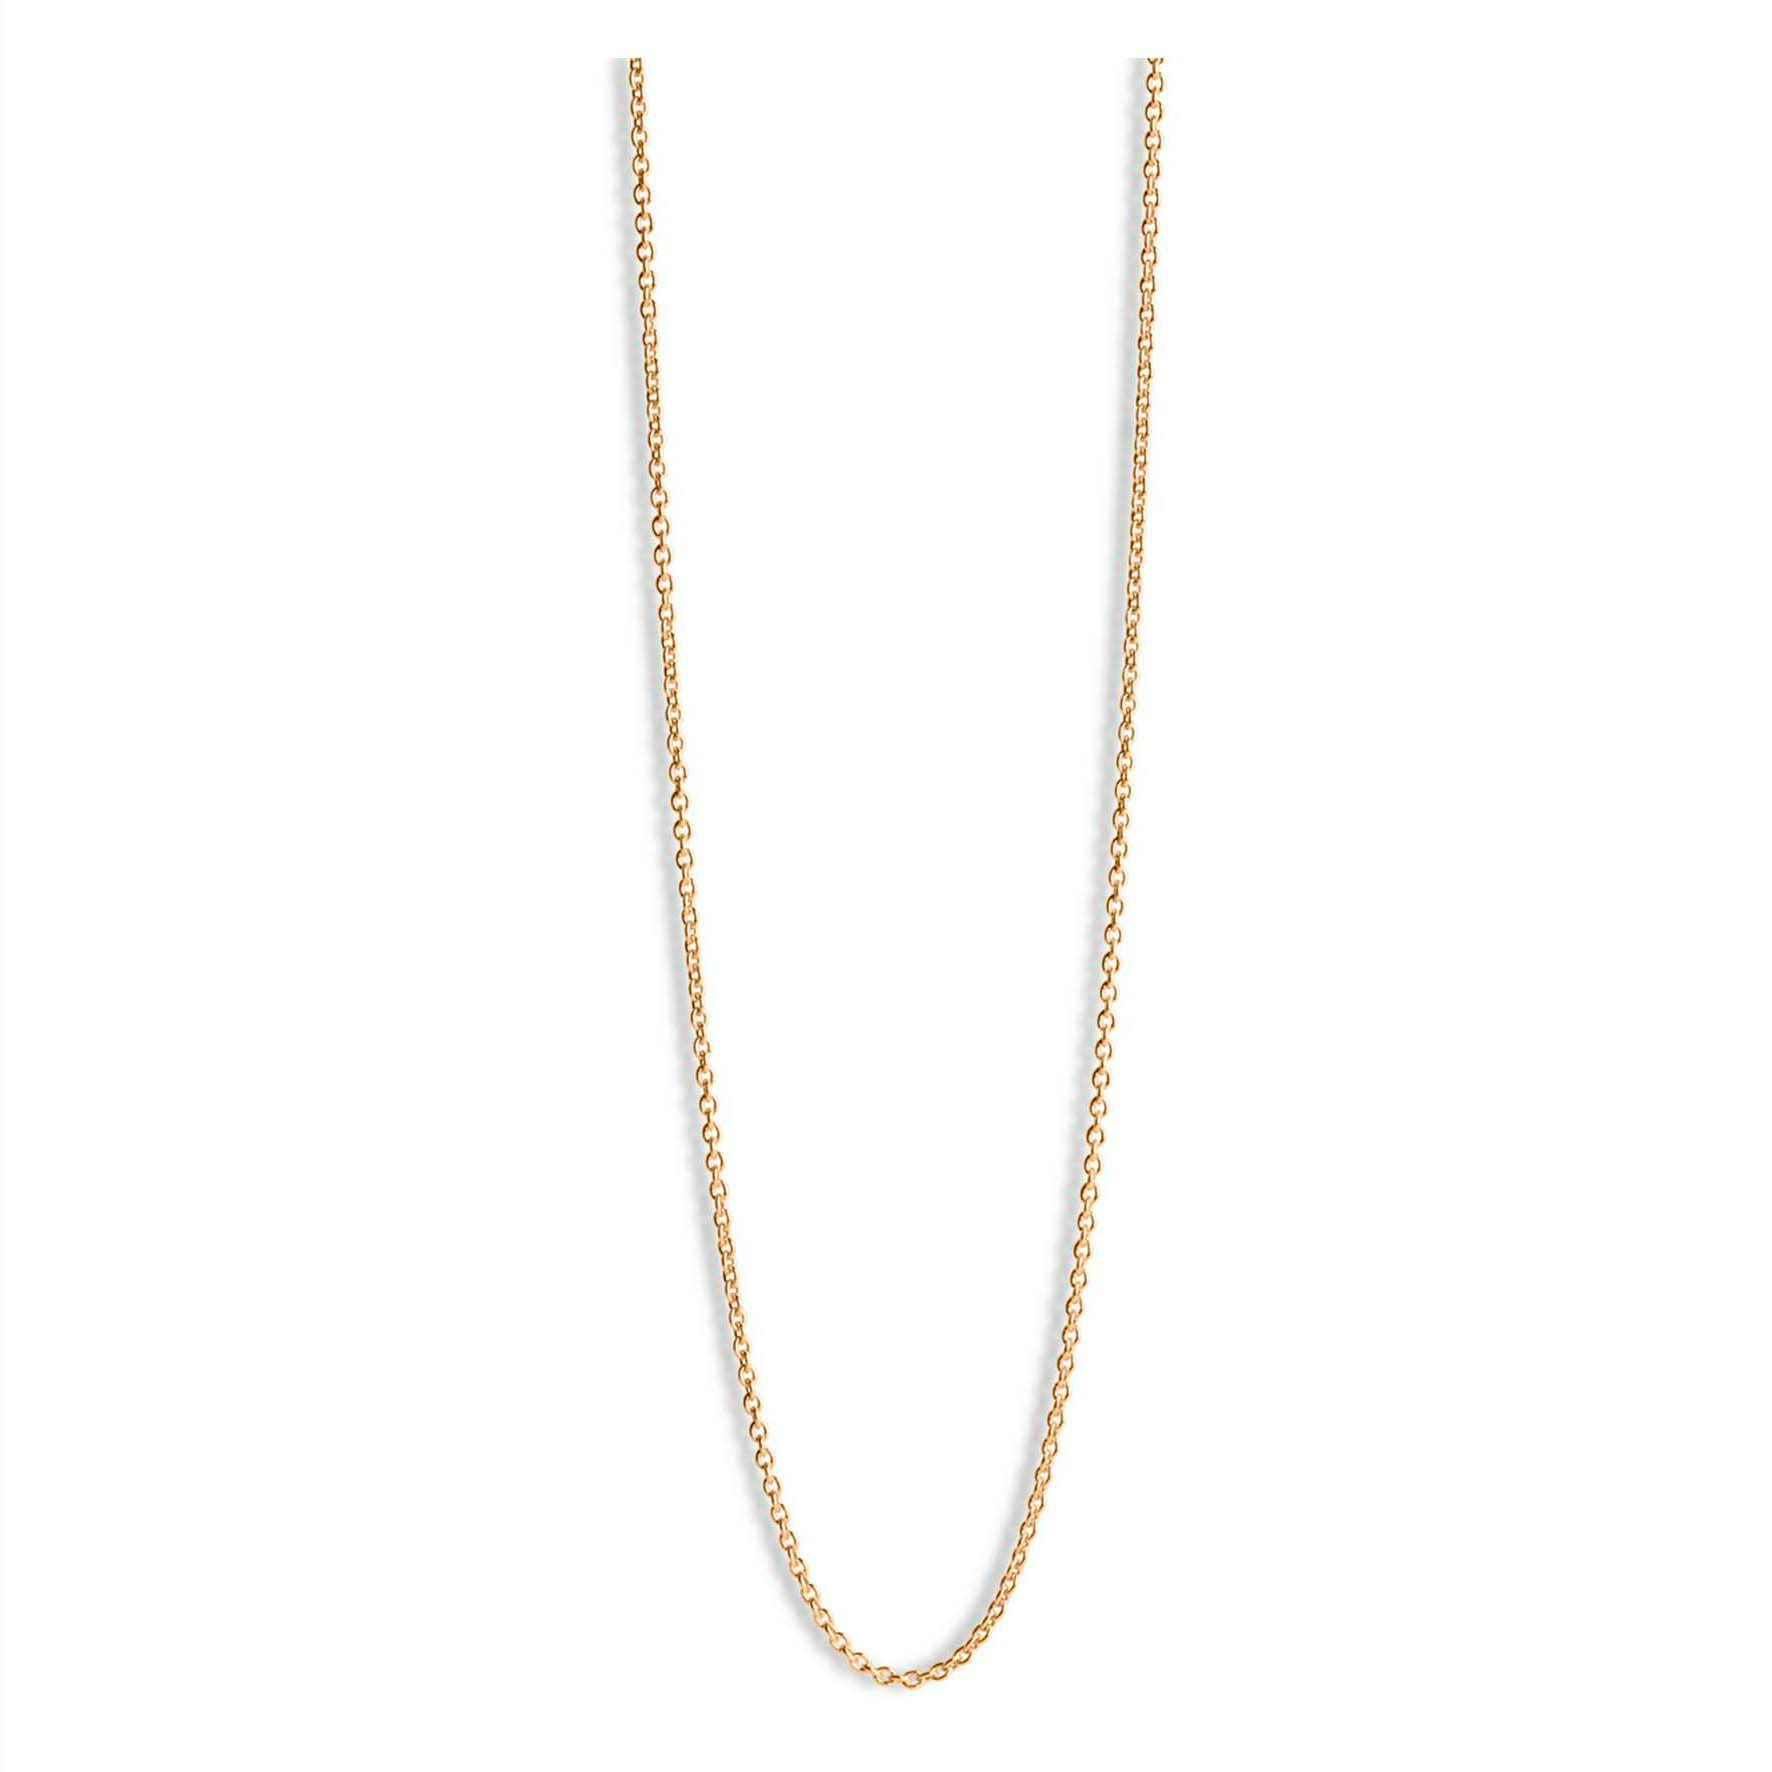 Anchor Chain Necklace from Jane Kønig in Goldplated Silver Sterling 925